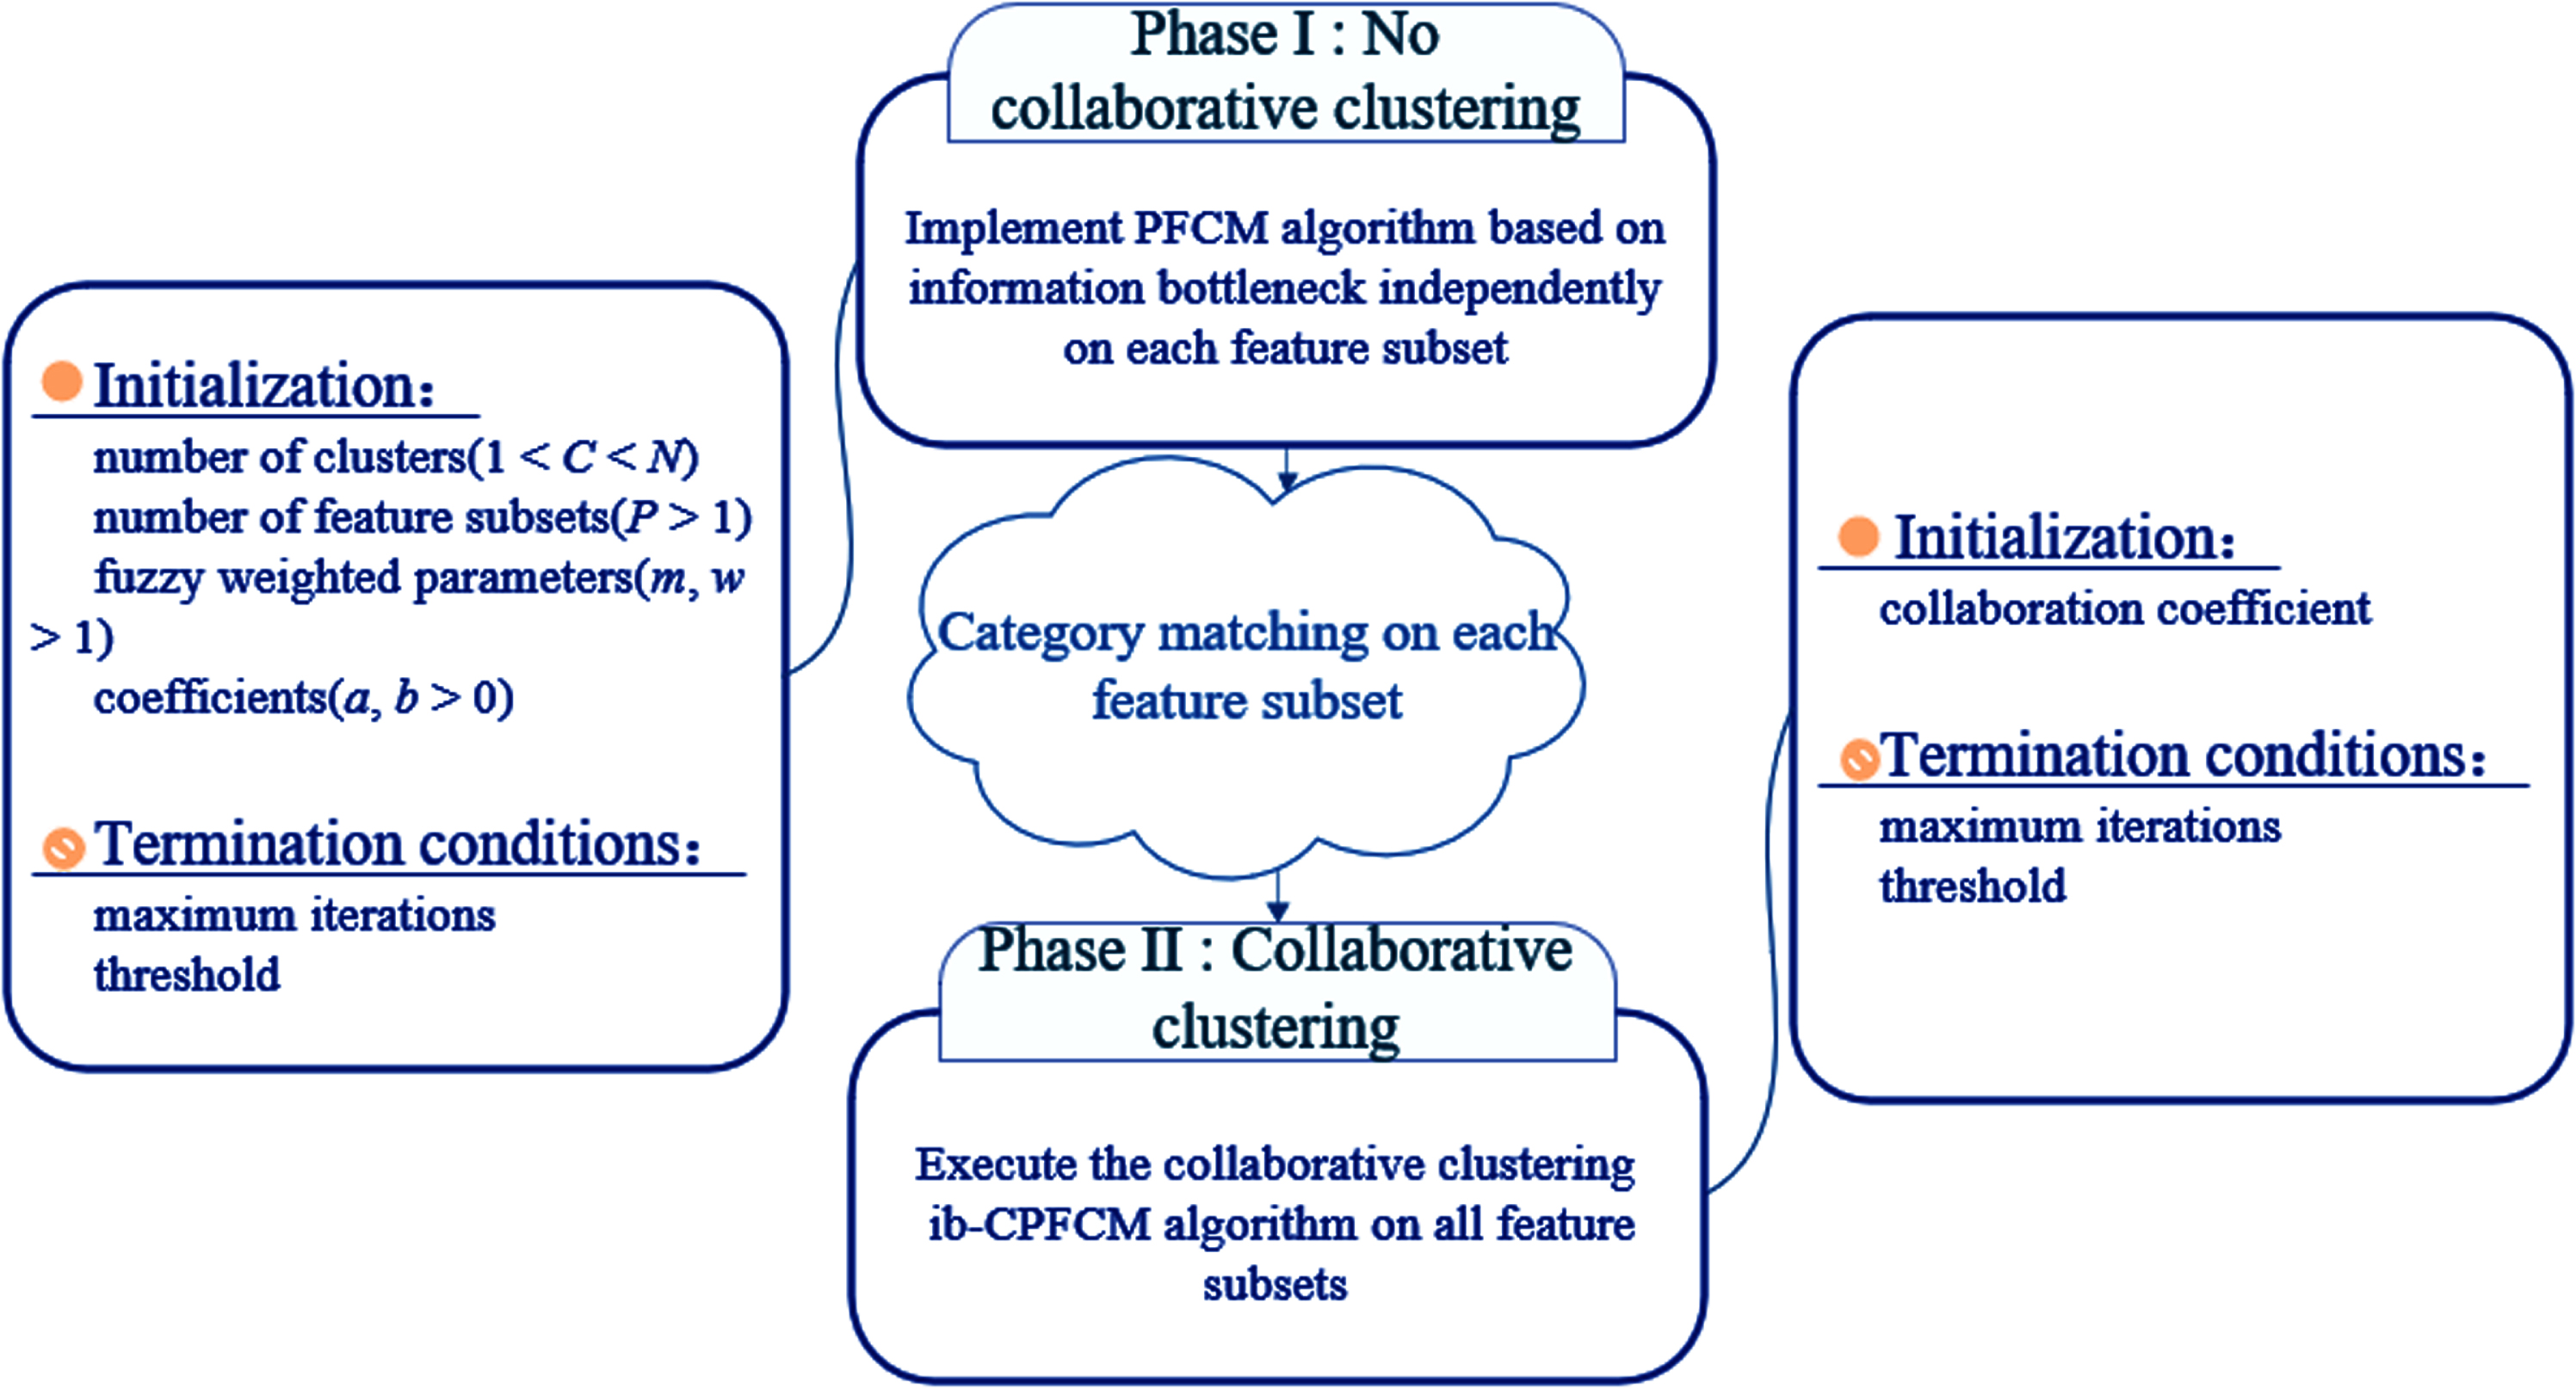 Two stages of ib-CPFCM clustering algorithm.